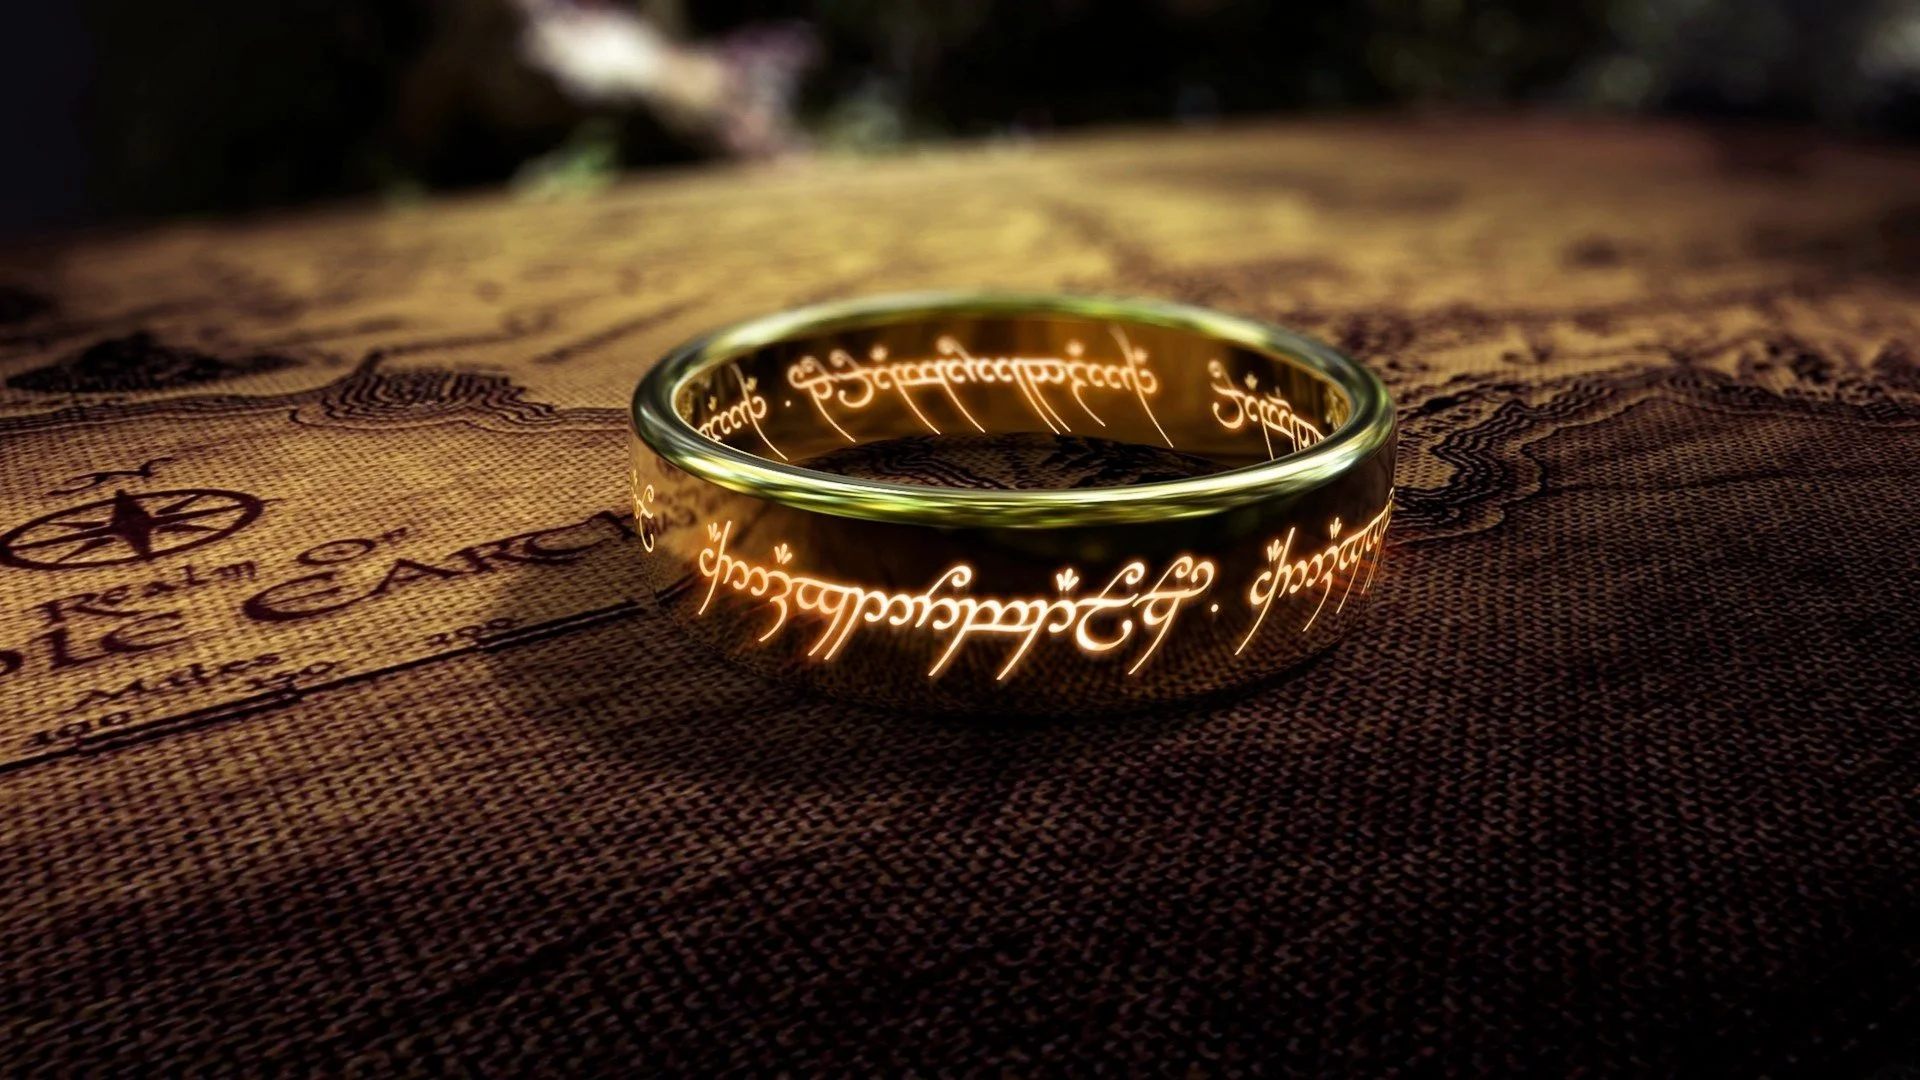 Teaser trailer for the series "The Lord of the Rings: Rings of Power" appeared on the network